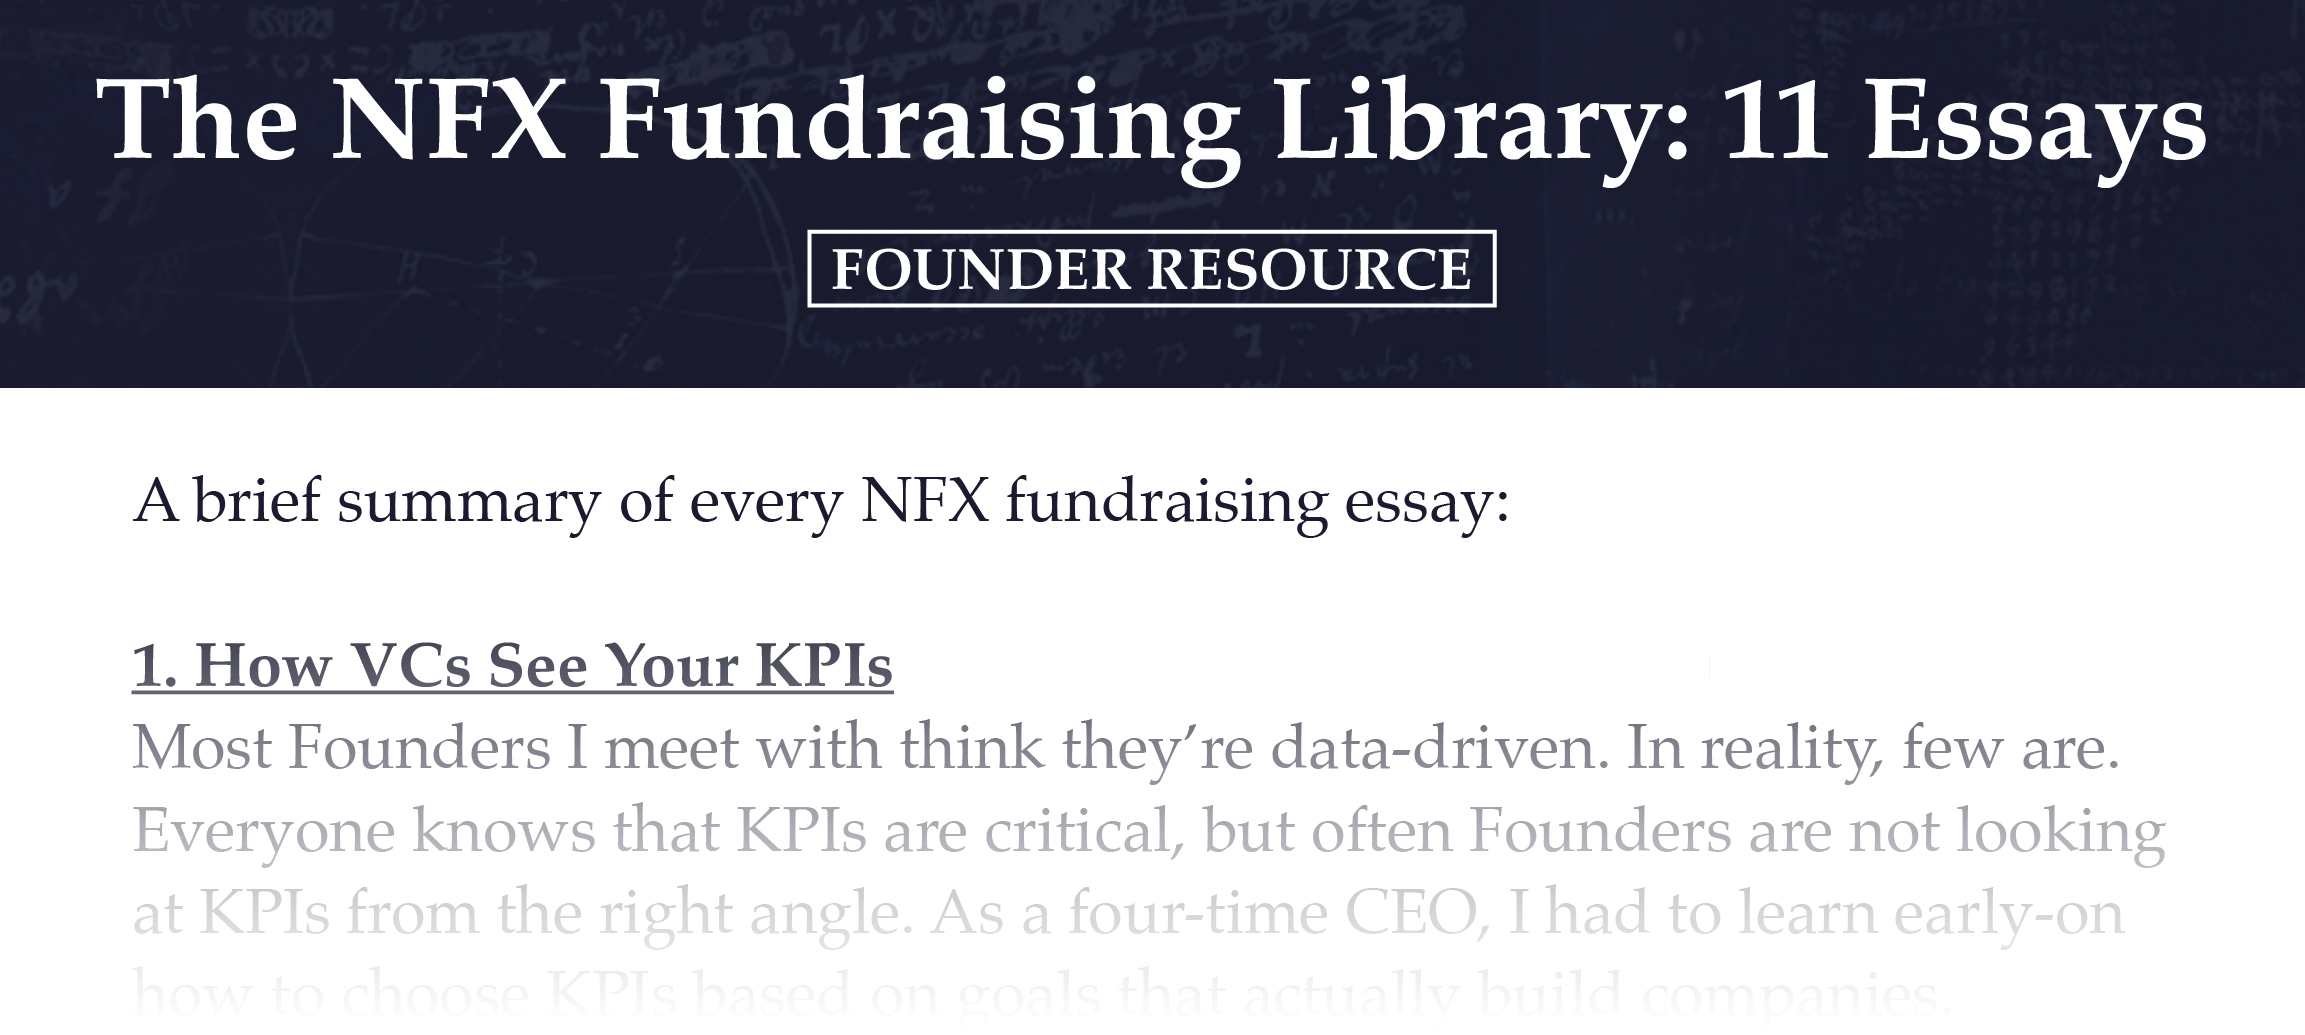 NFX Fundraising Library